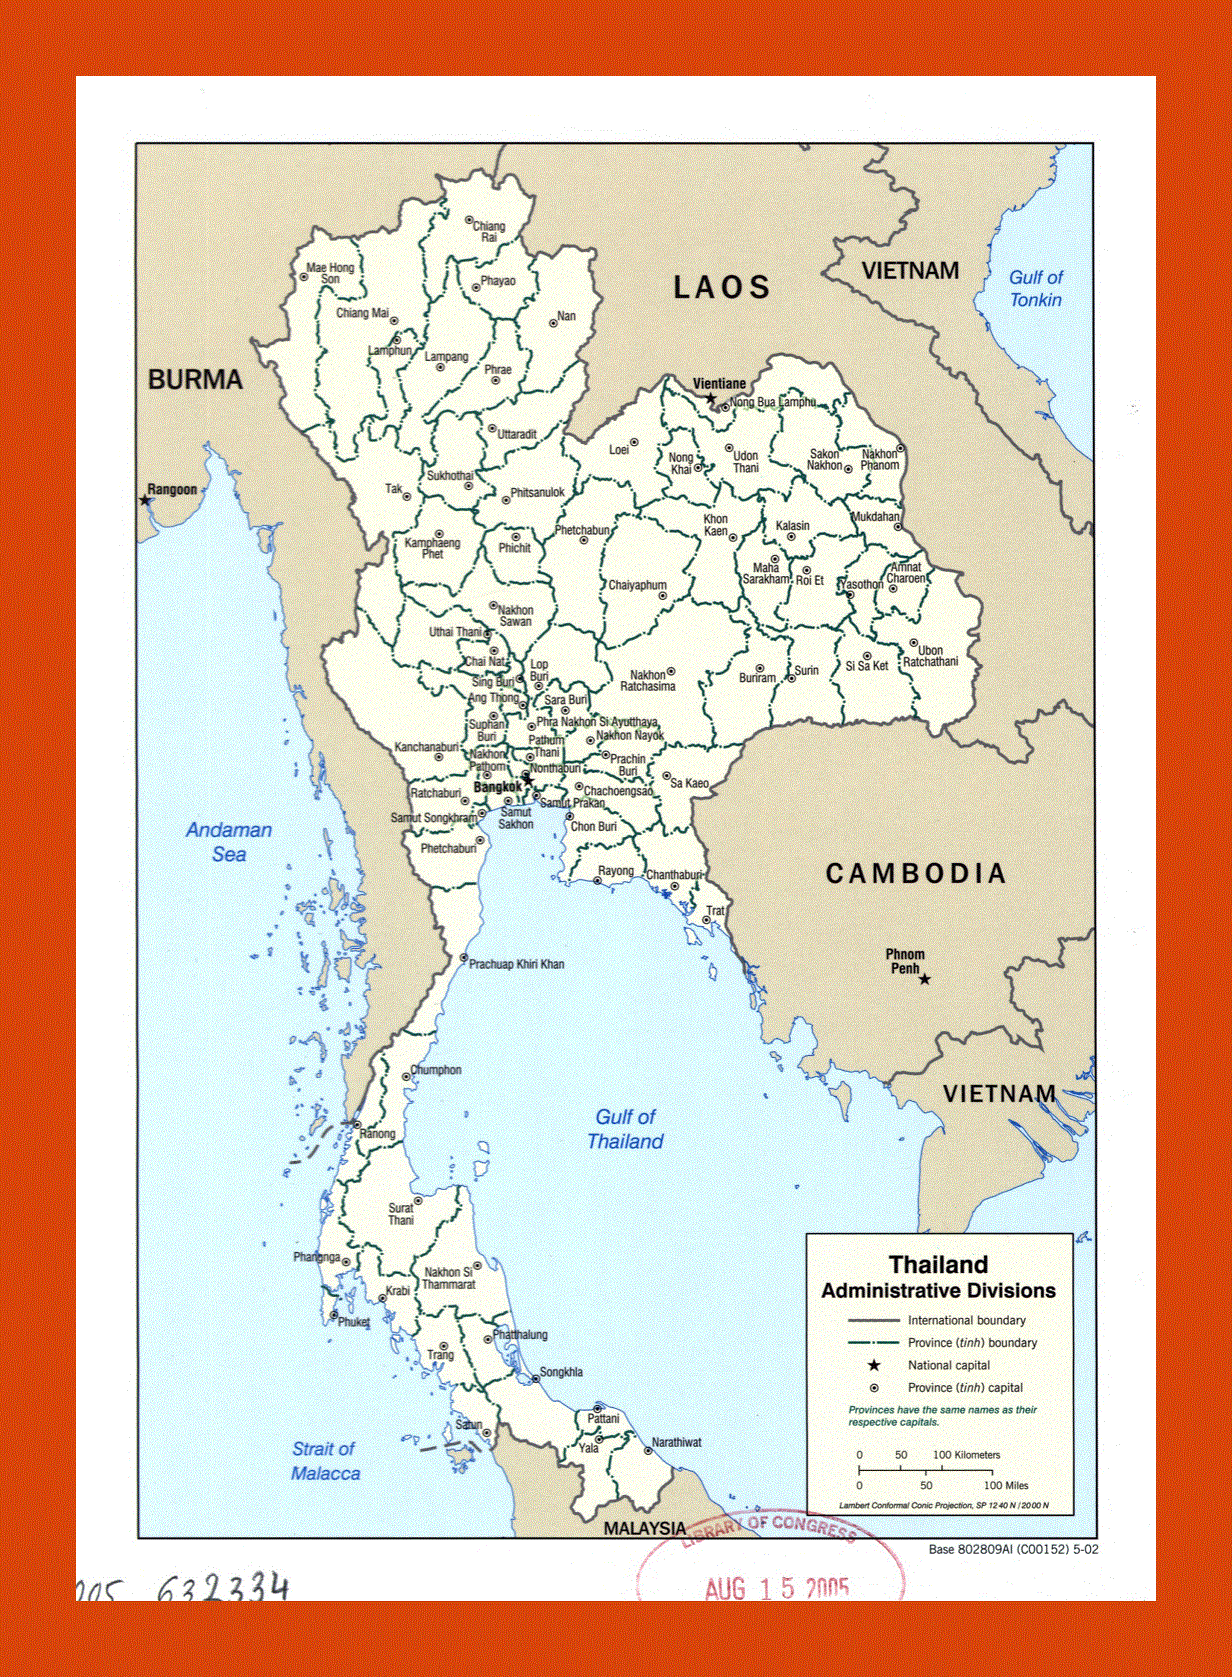 Administrative divisions map of Thailand - 2002